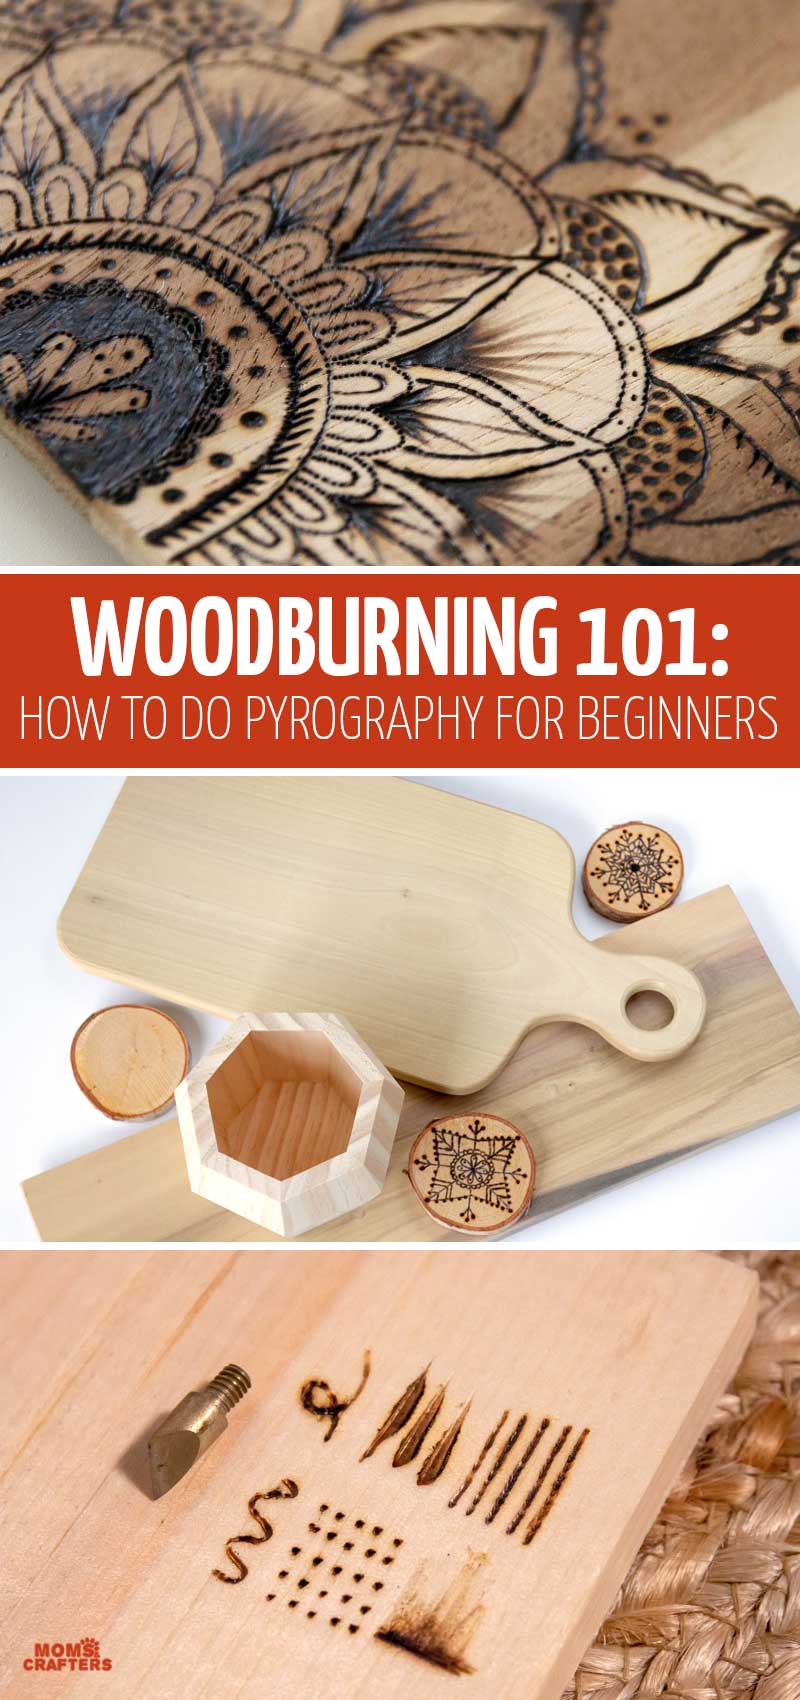 Woodburning Tutorial - How to Learn Pyrography from Scratch